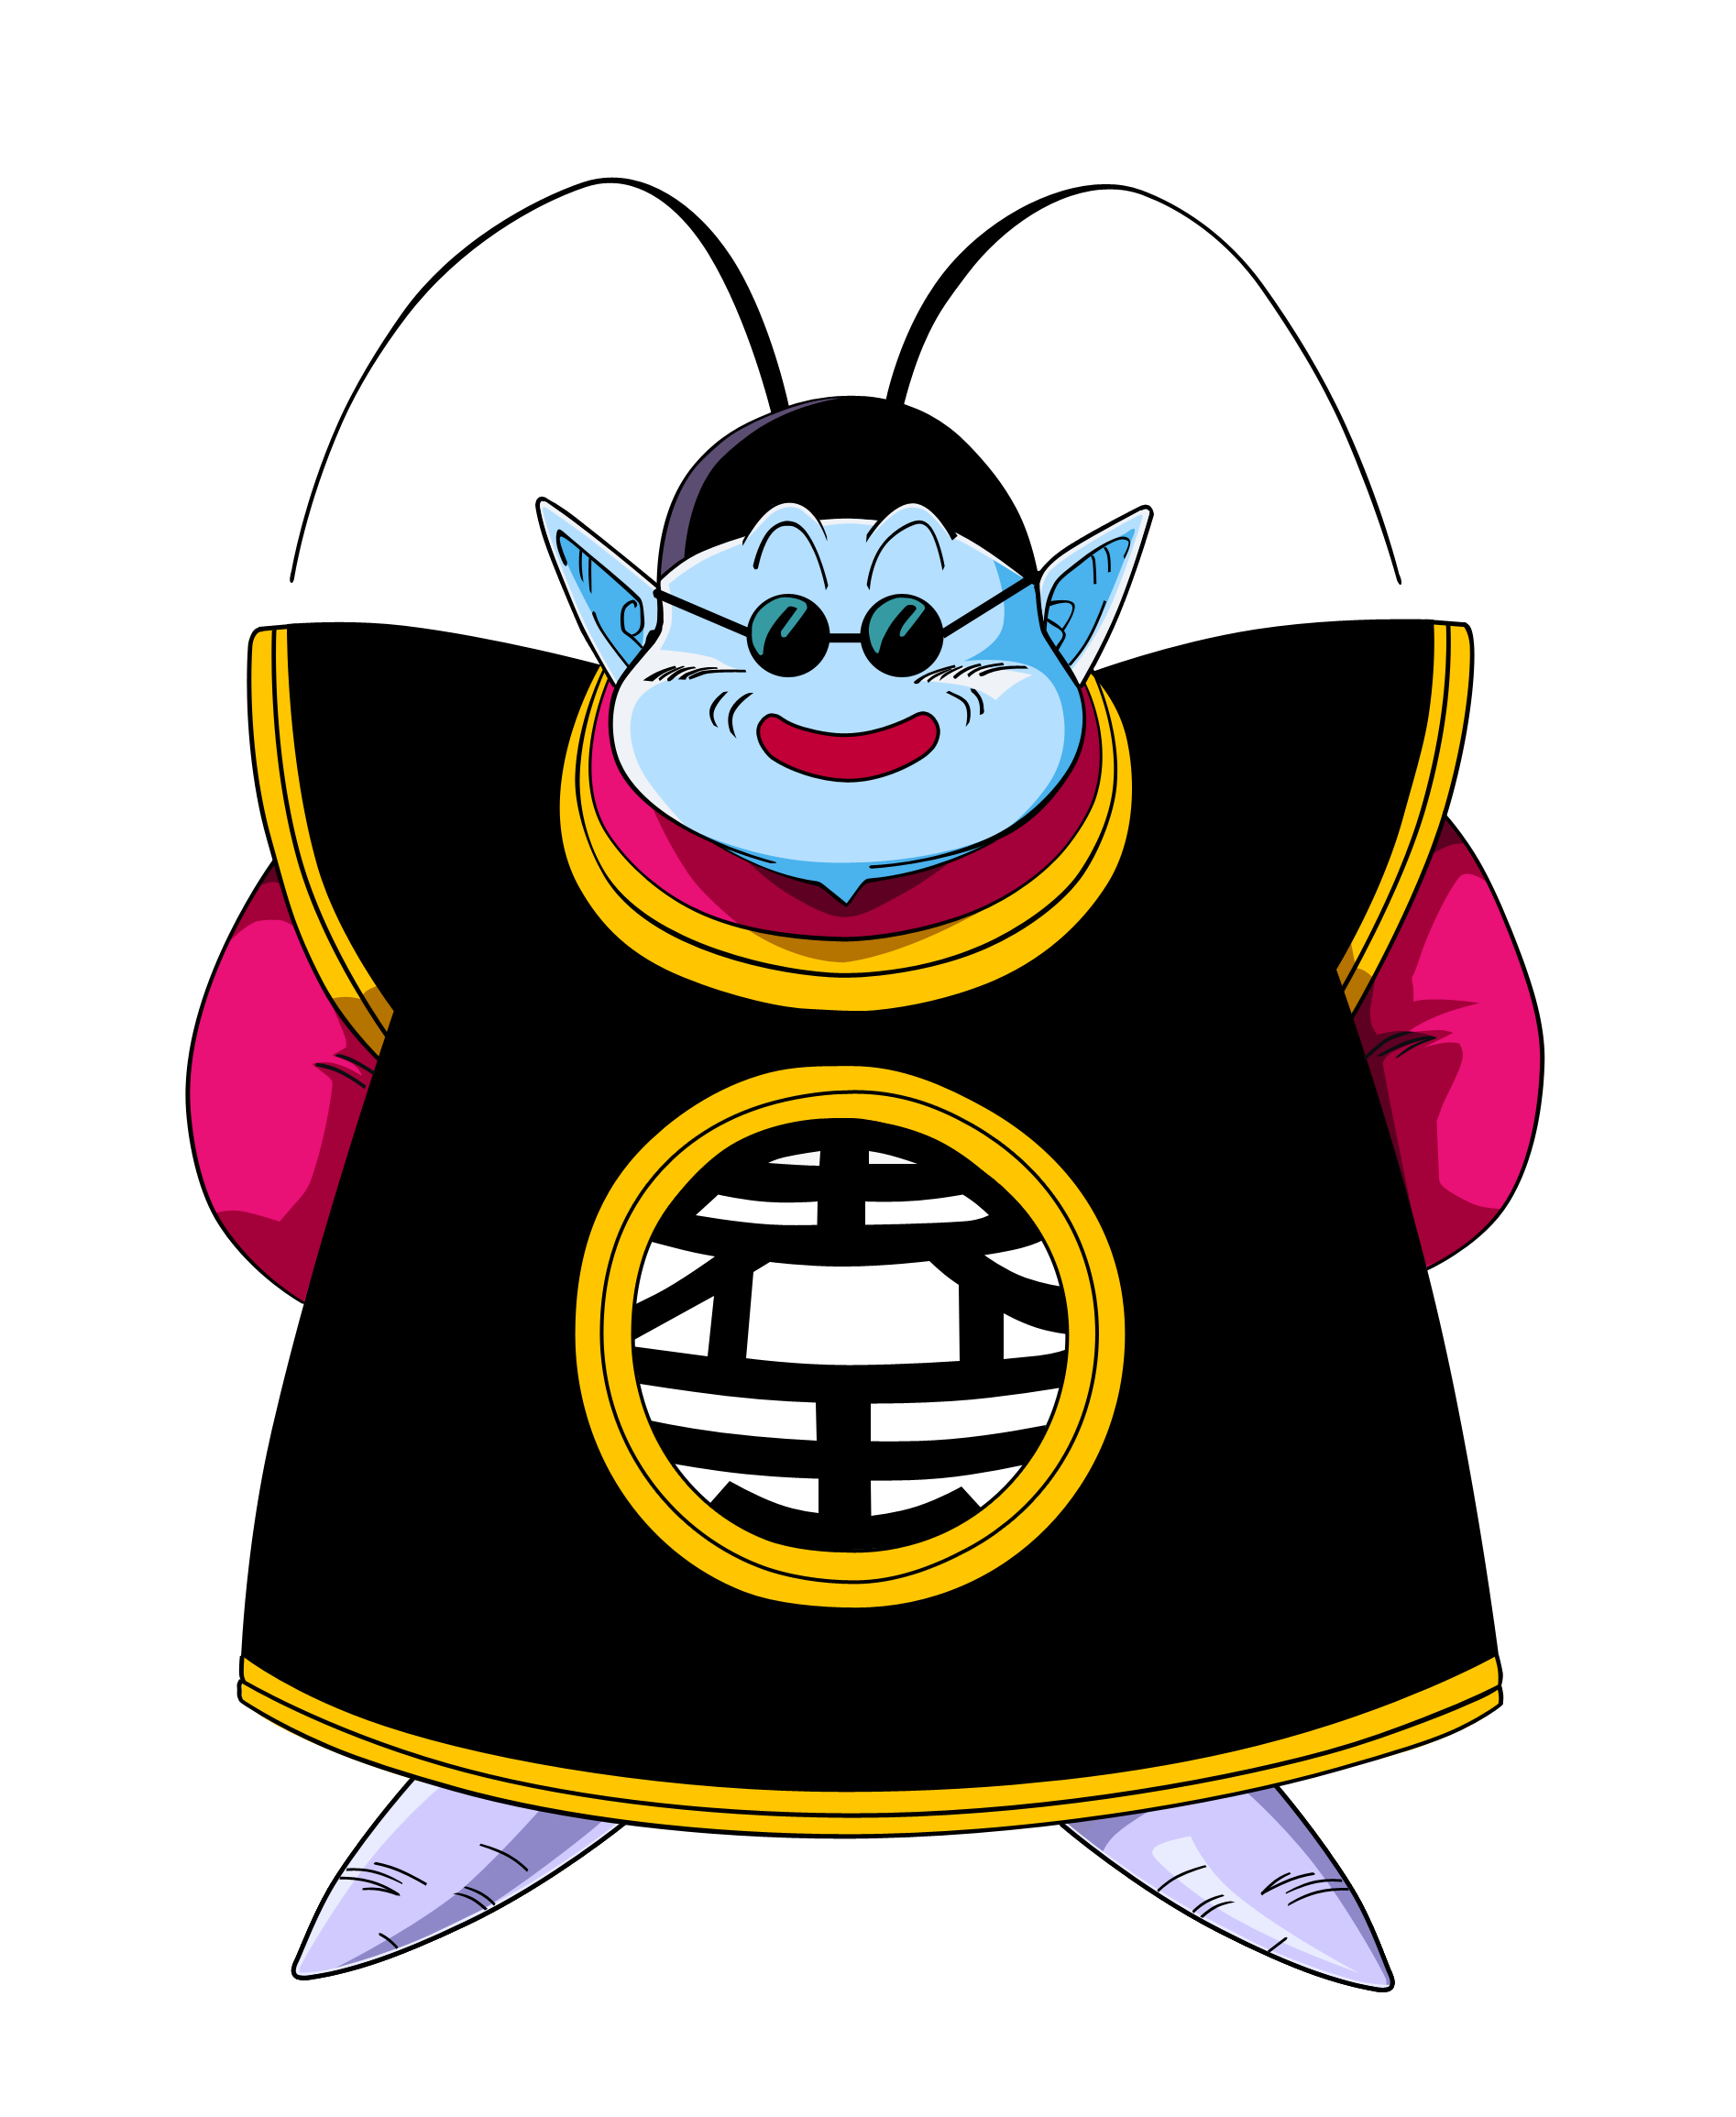 http://img2.wikia.nocookie.net/__cb20110831185231/dragonball/es/images/archive/d/d6/20131107045804!Kaiosamanorte.png